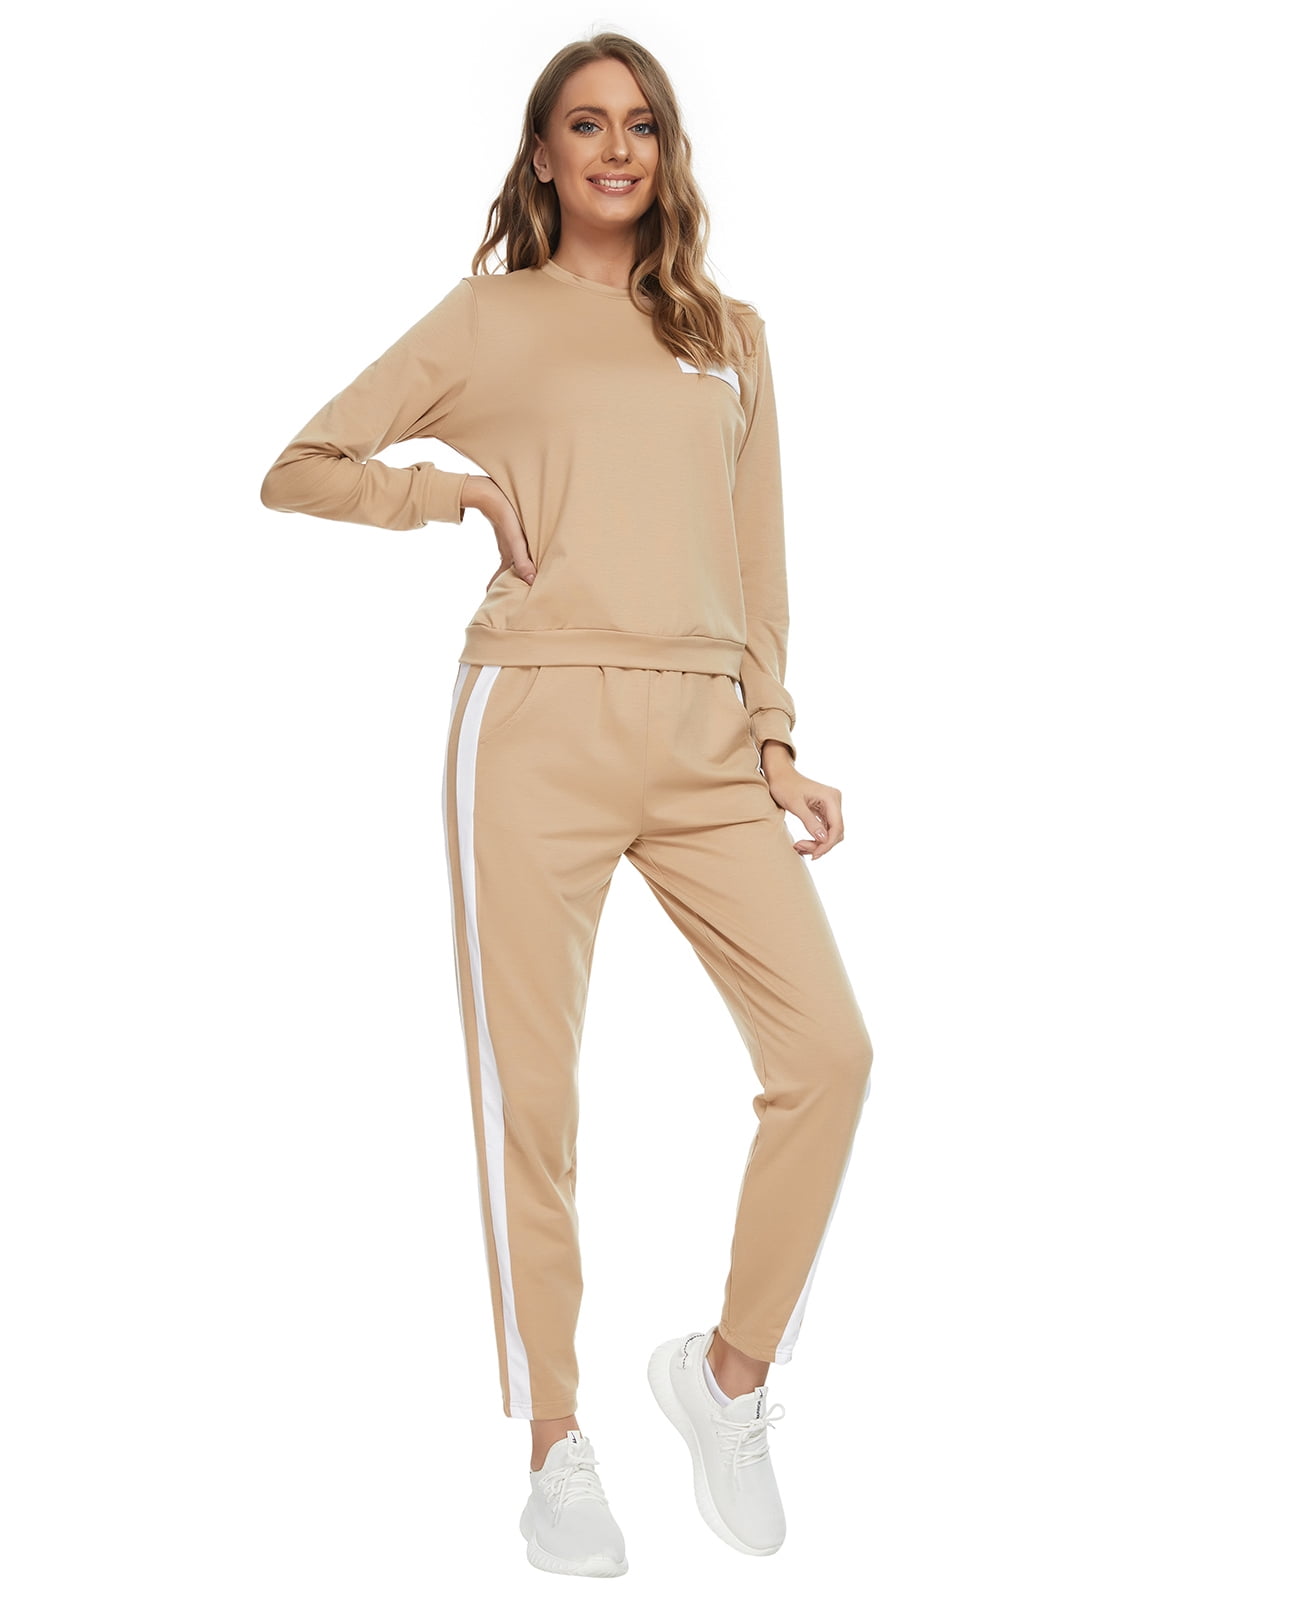 MintLimit Womens Sweatsuits 2 Piece Long Sleeve Outfits Ripped Hole ...